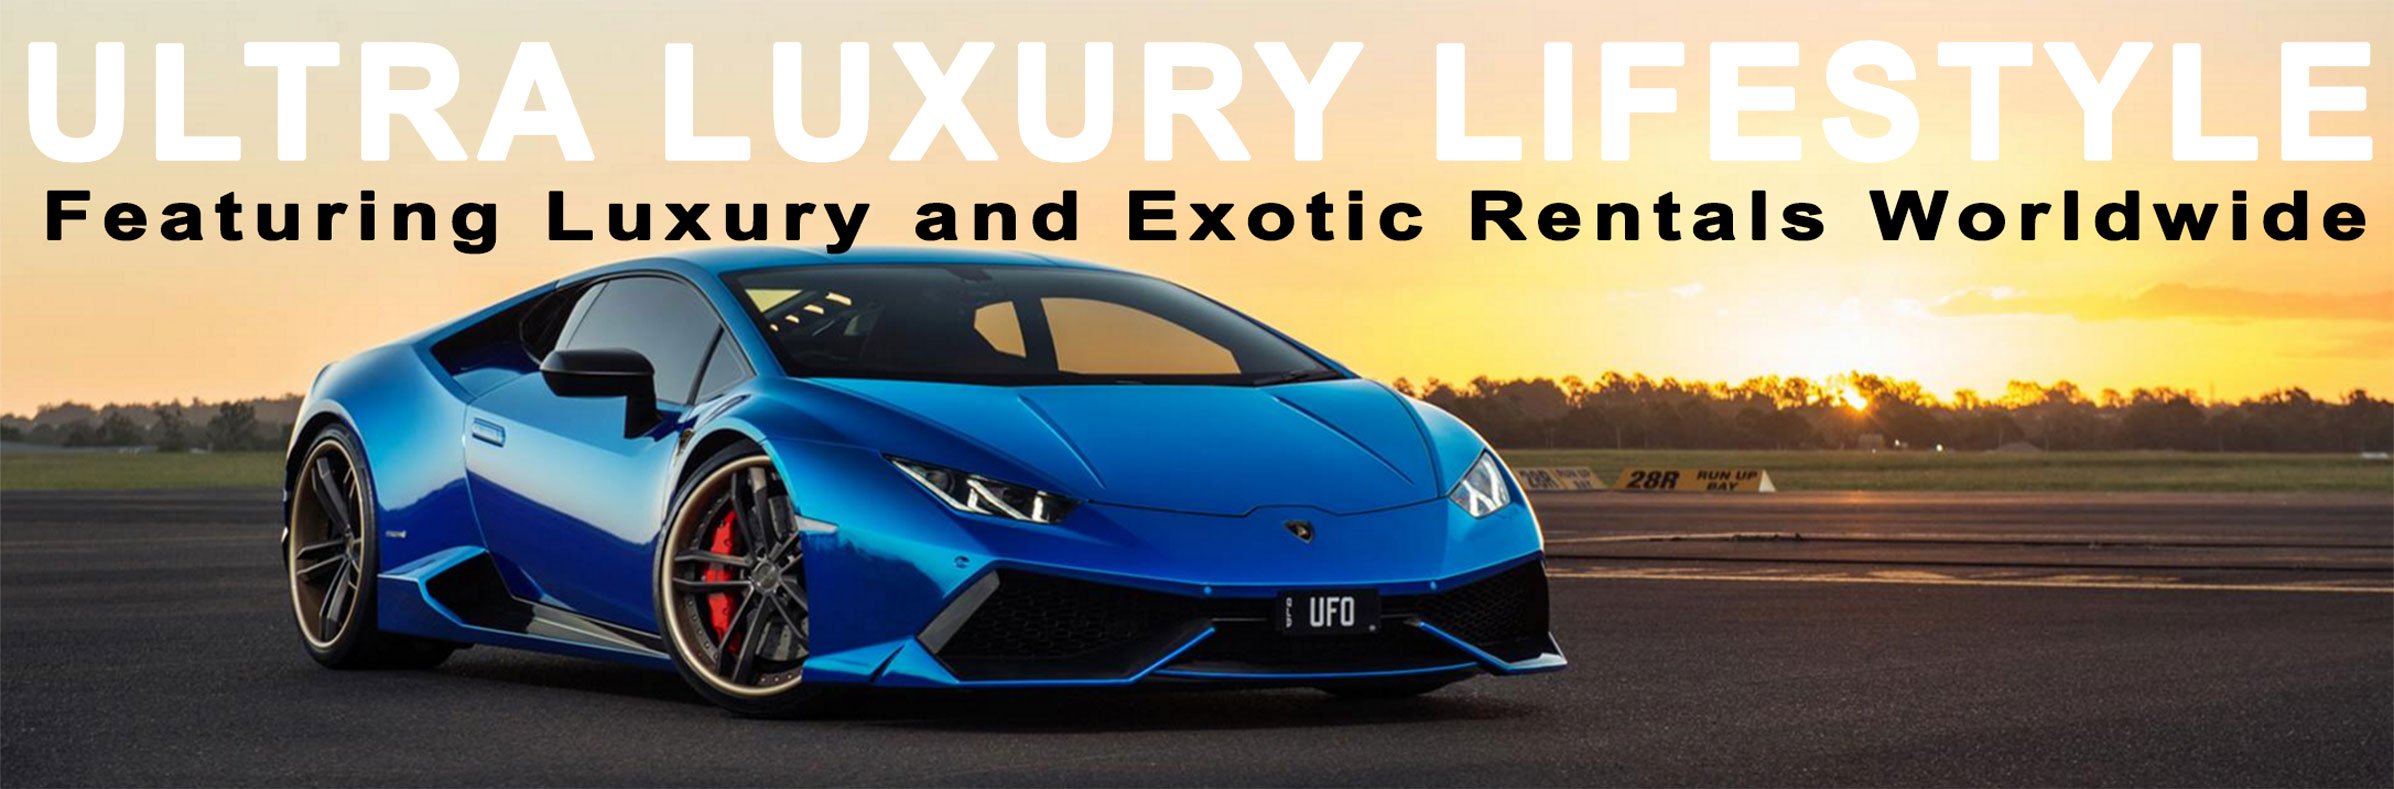 Featuring Exotic and Luxury Rentals from Coast to Coast